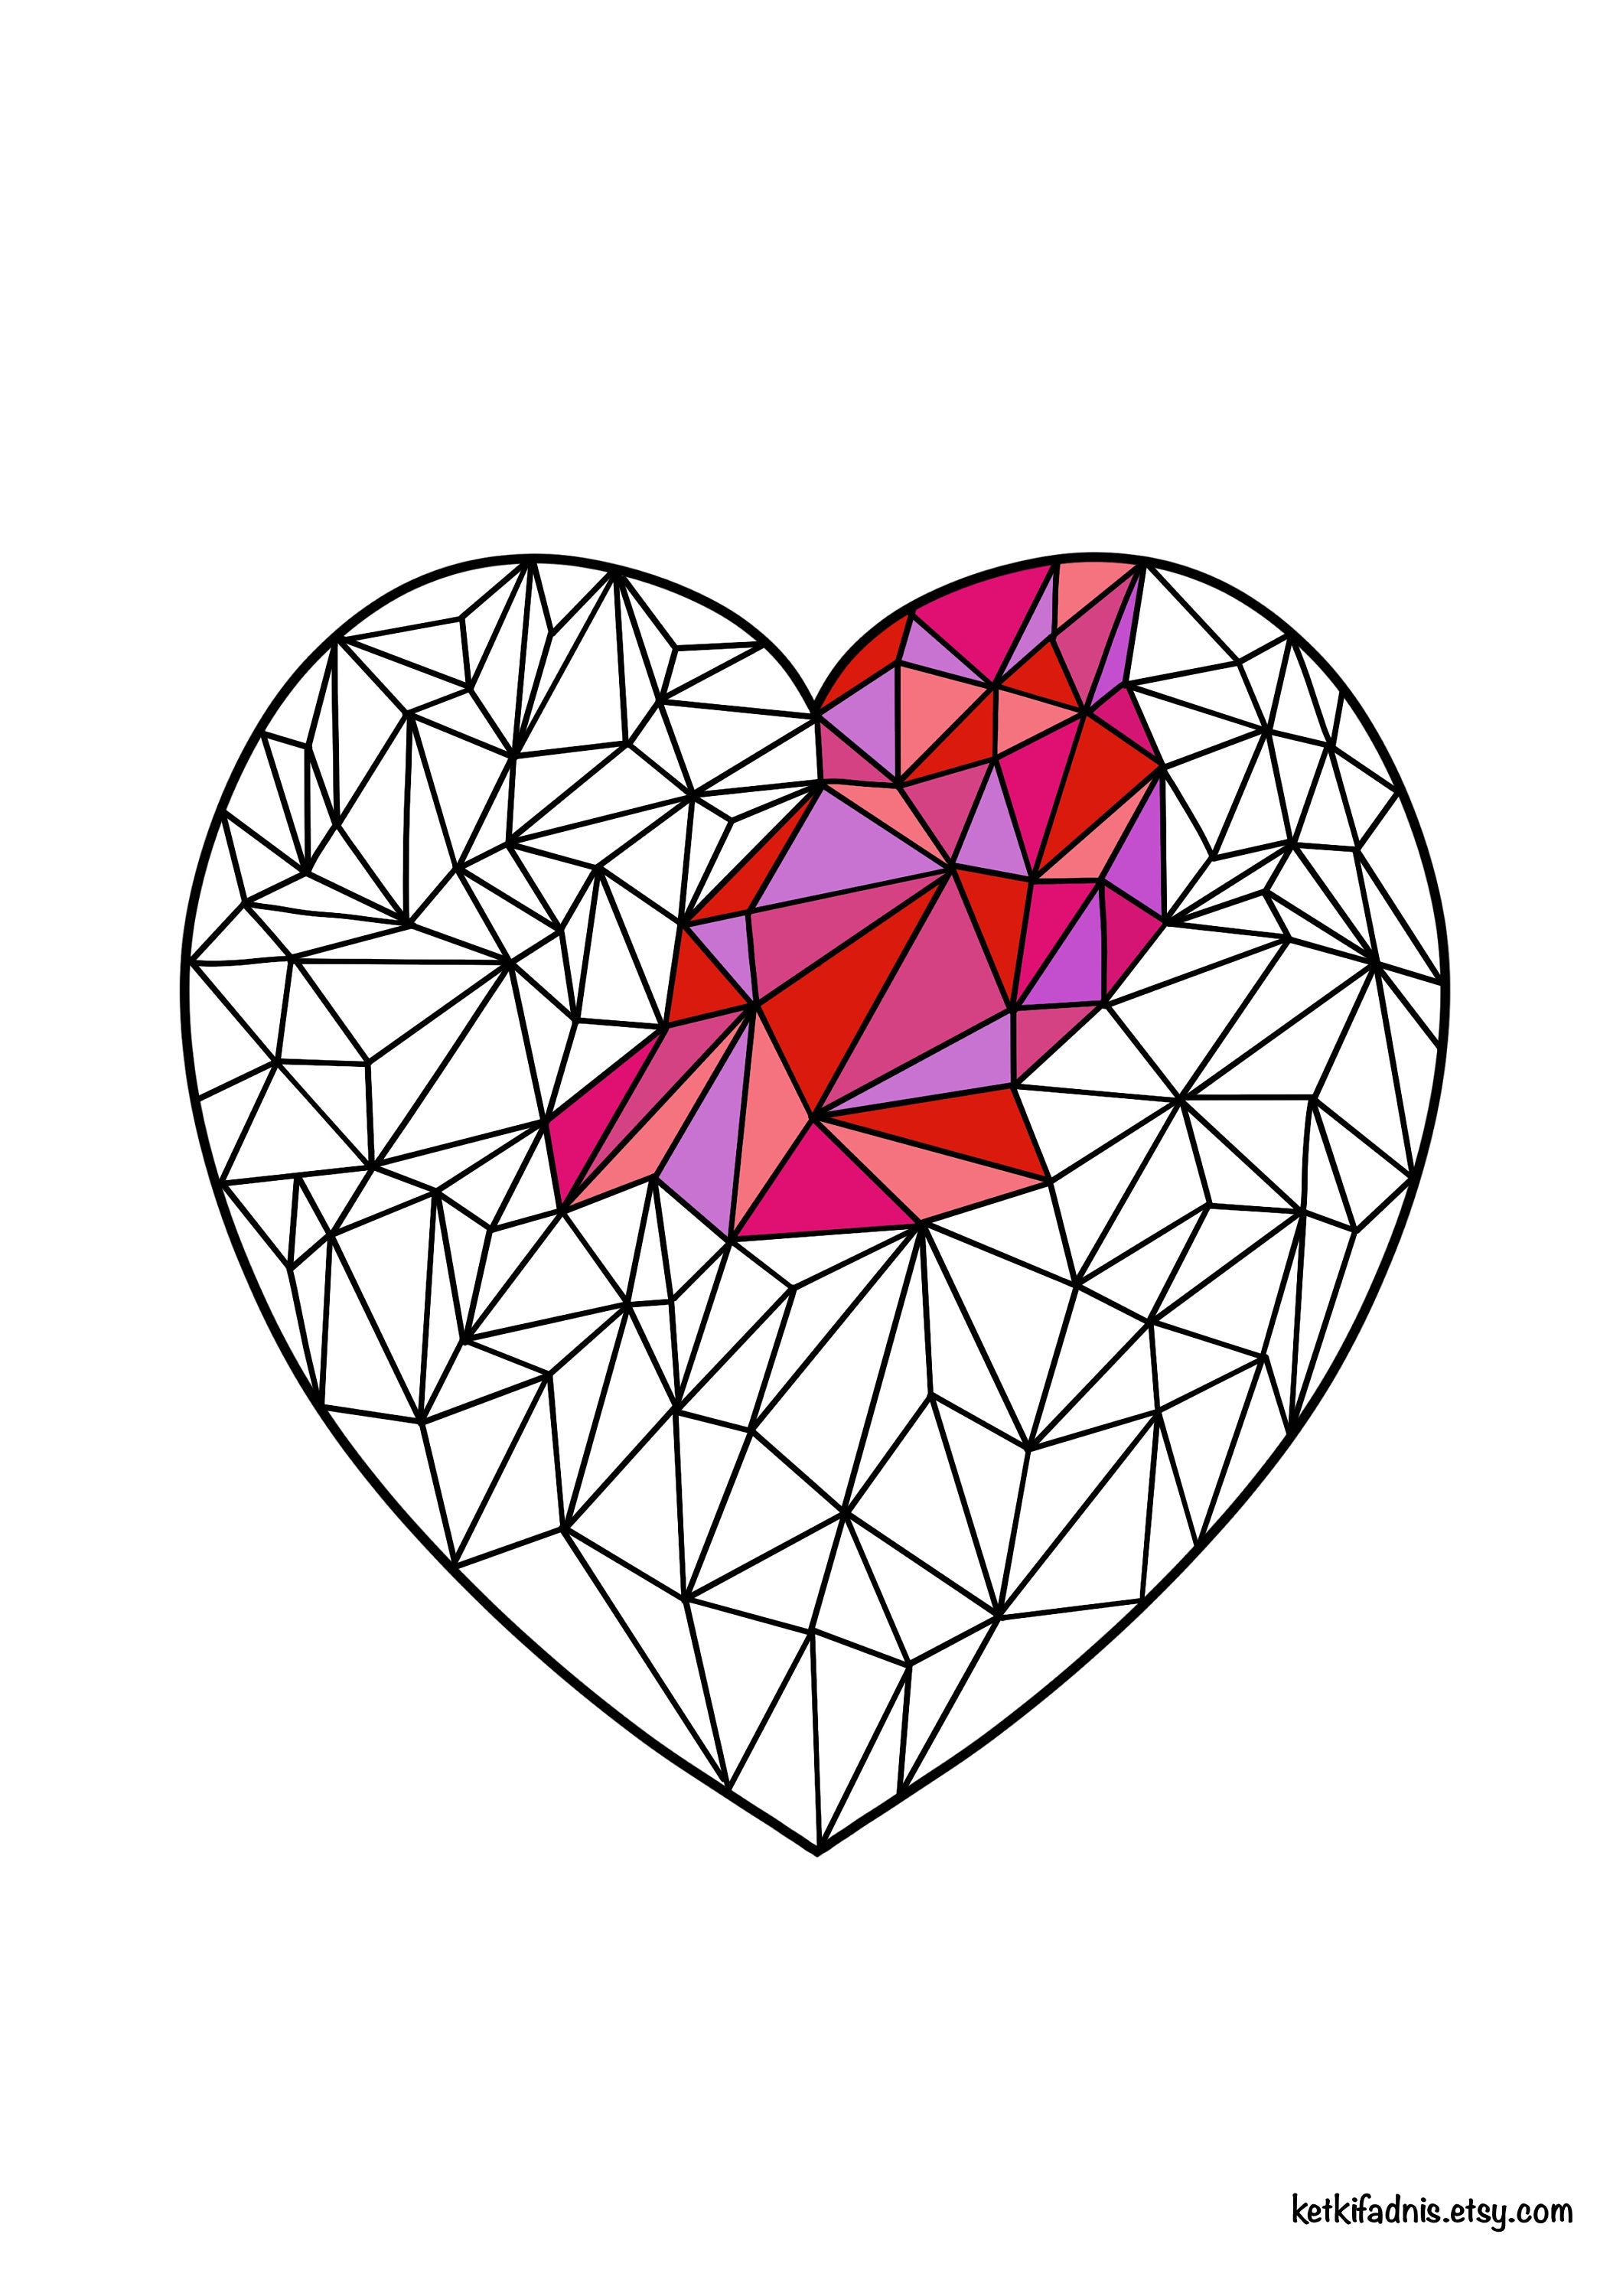 Heart pdf digital download zentangle valentines day coloring page